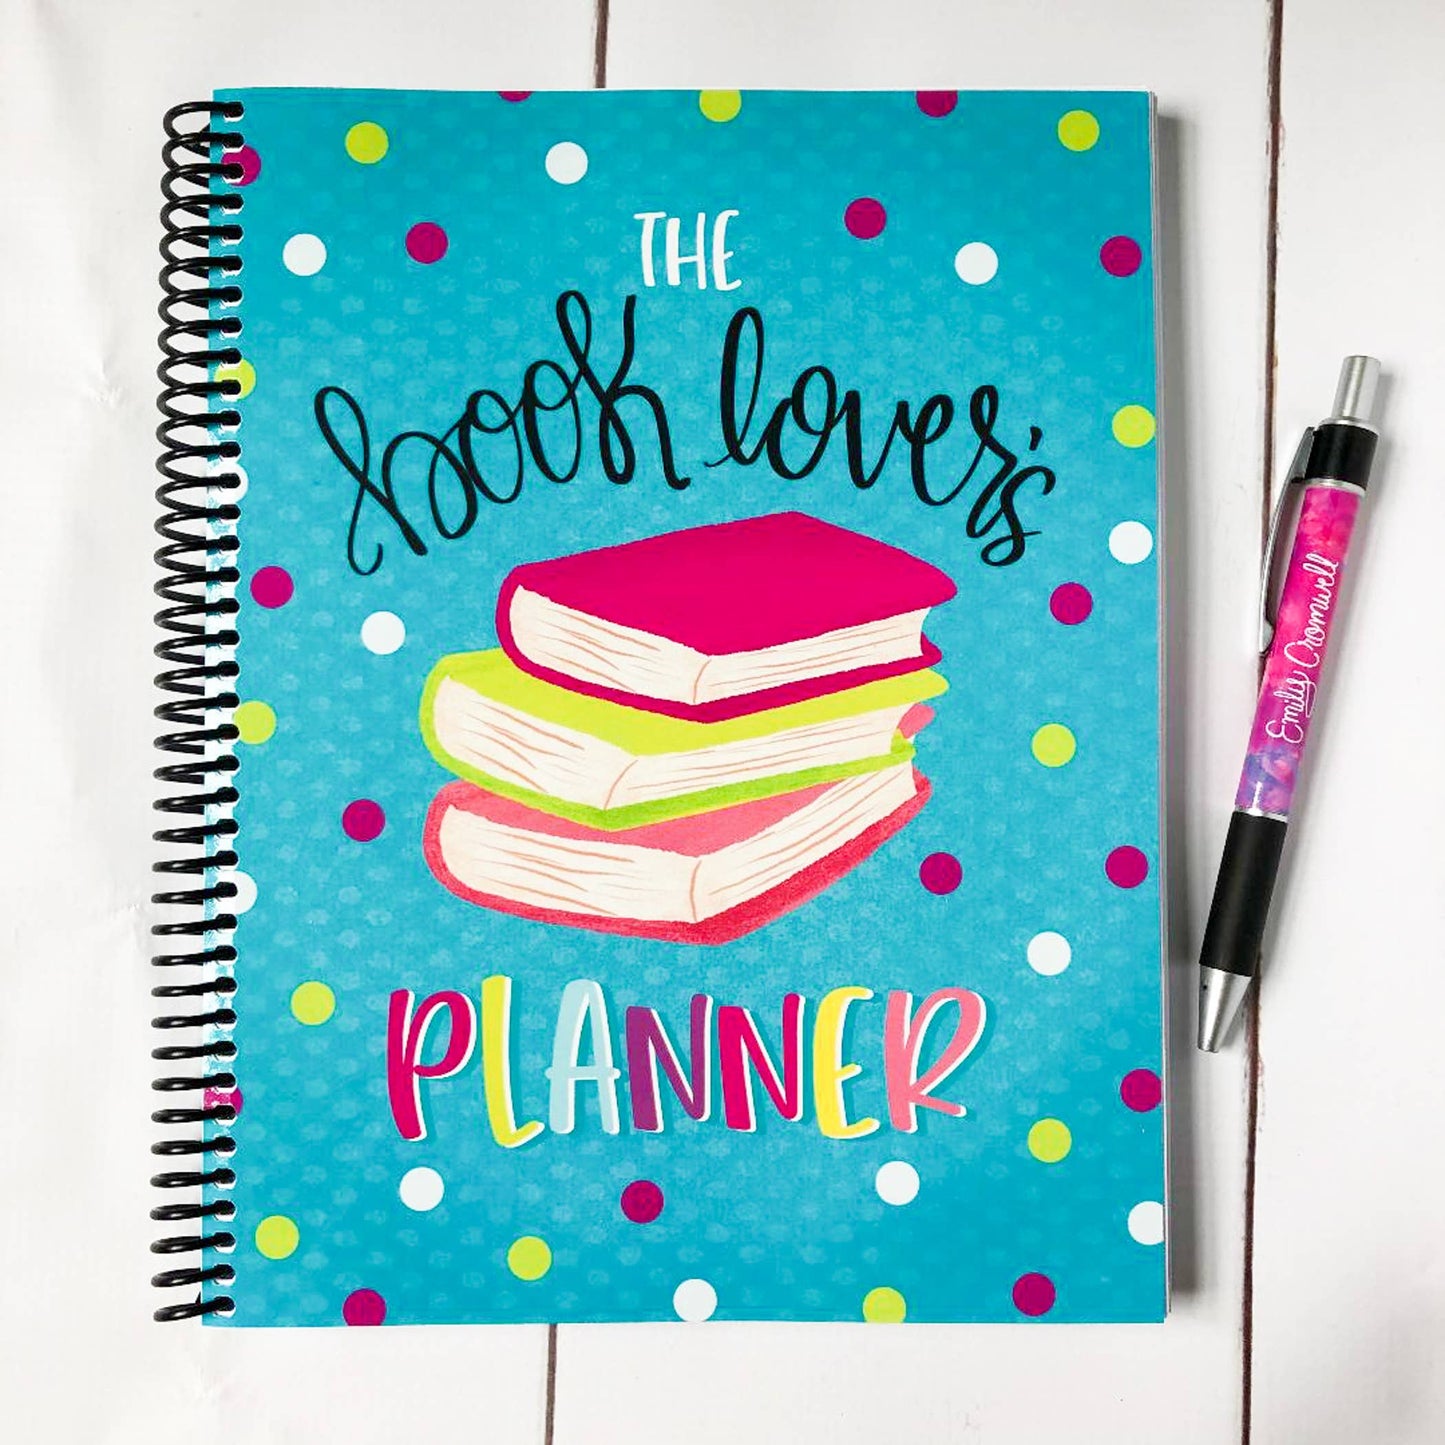 The Book Lover's Planner